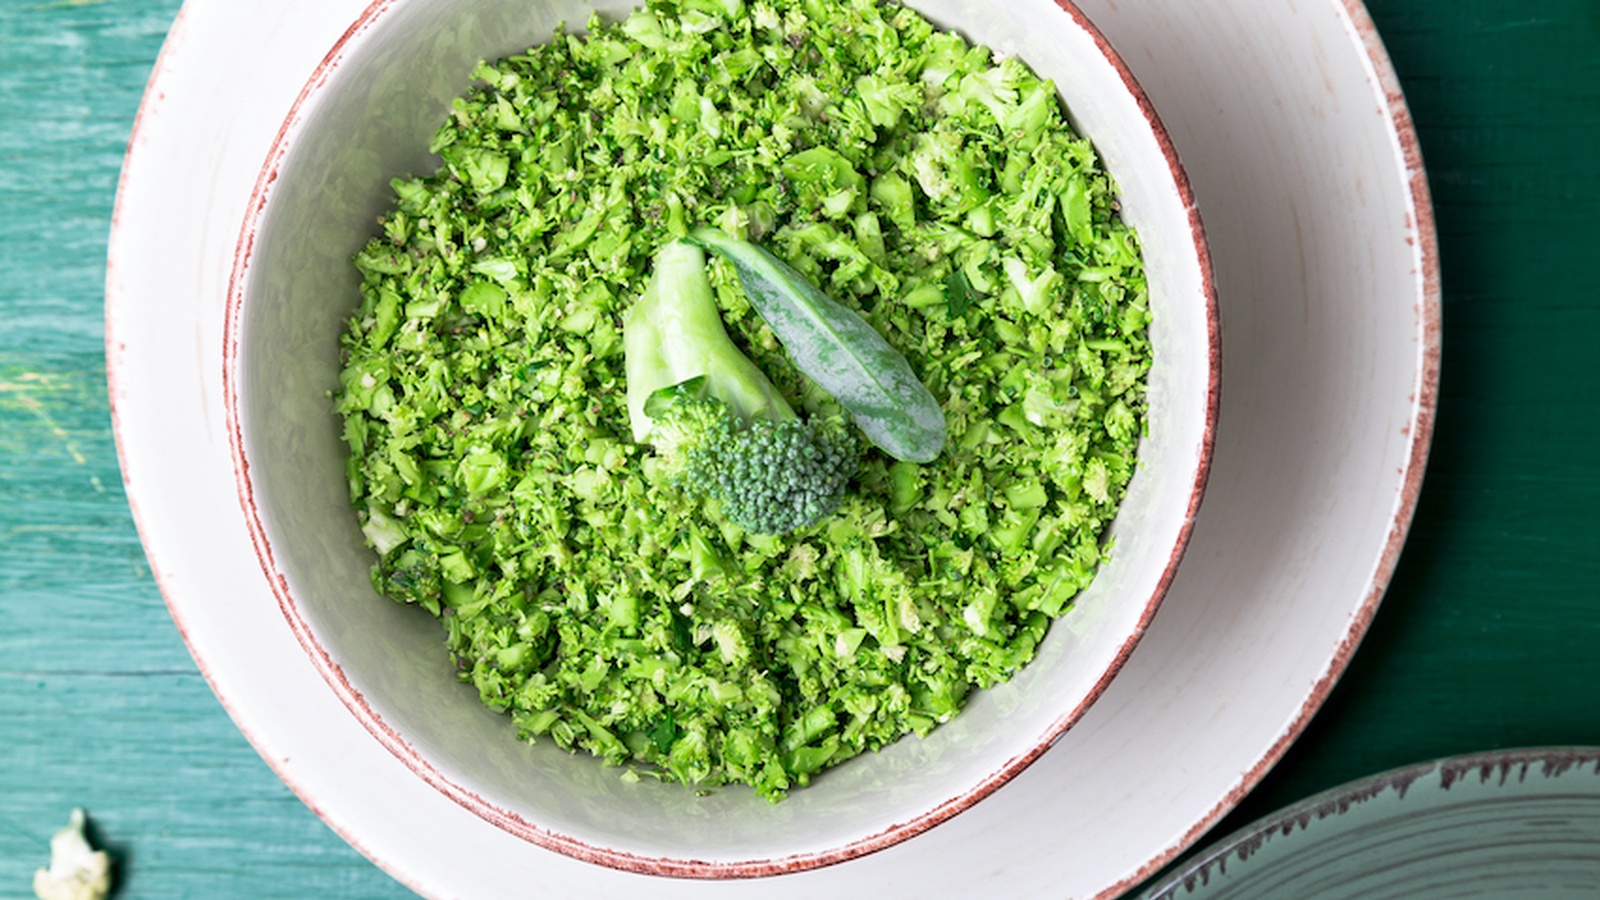 Riced Broccoli Recipe: Instantly Up Your Fiber Intake